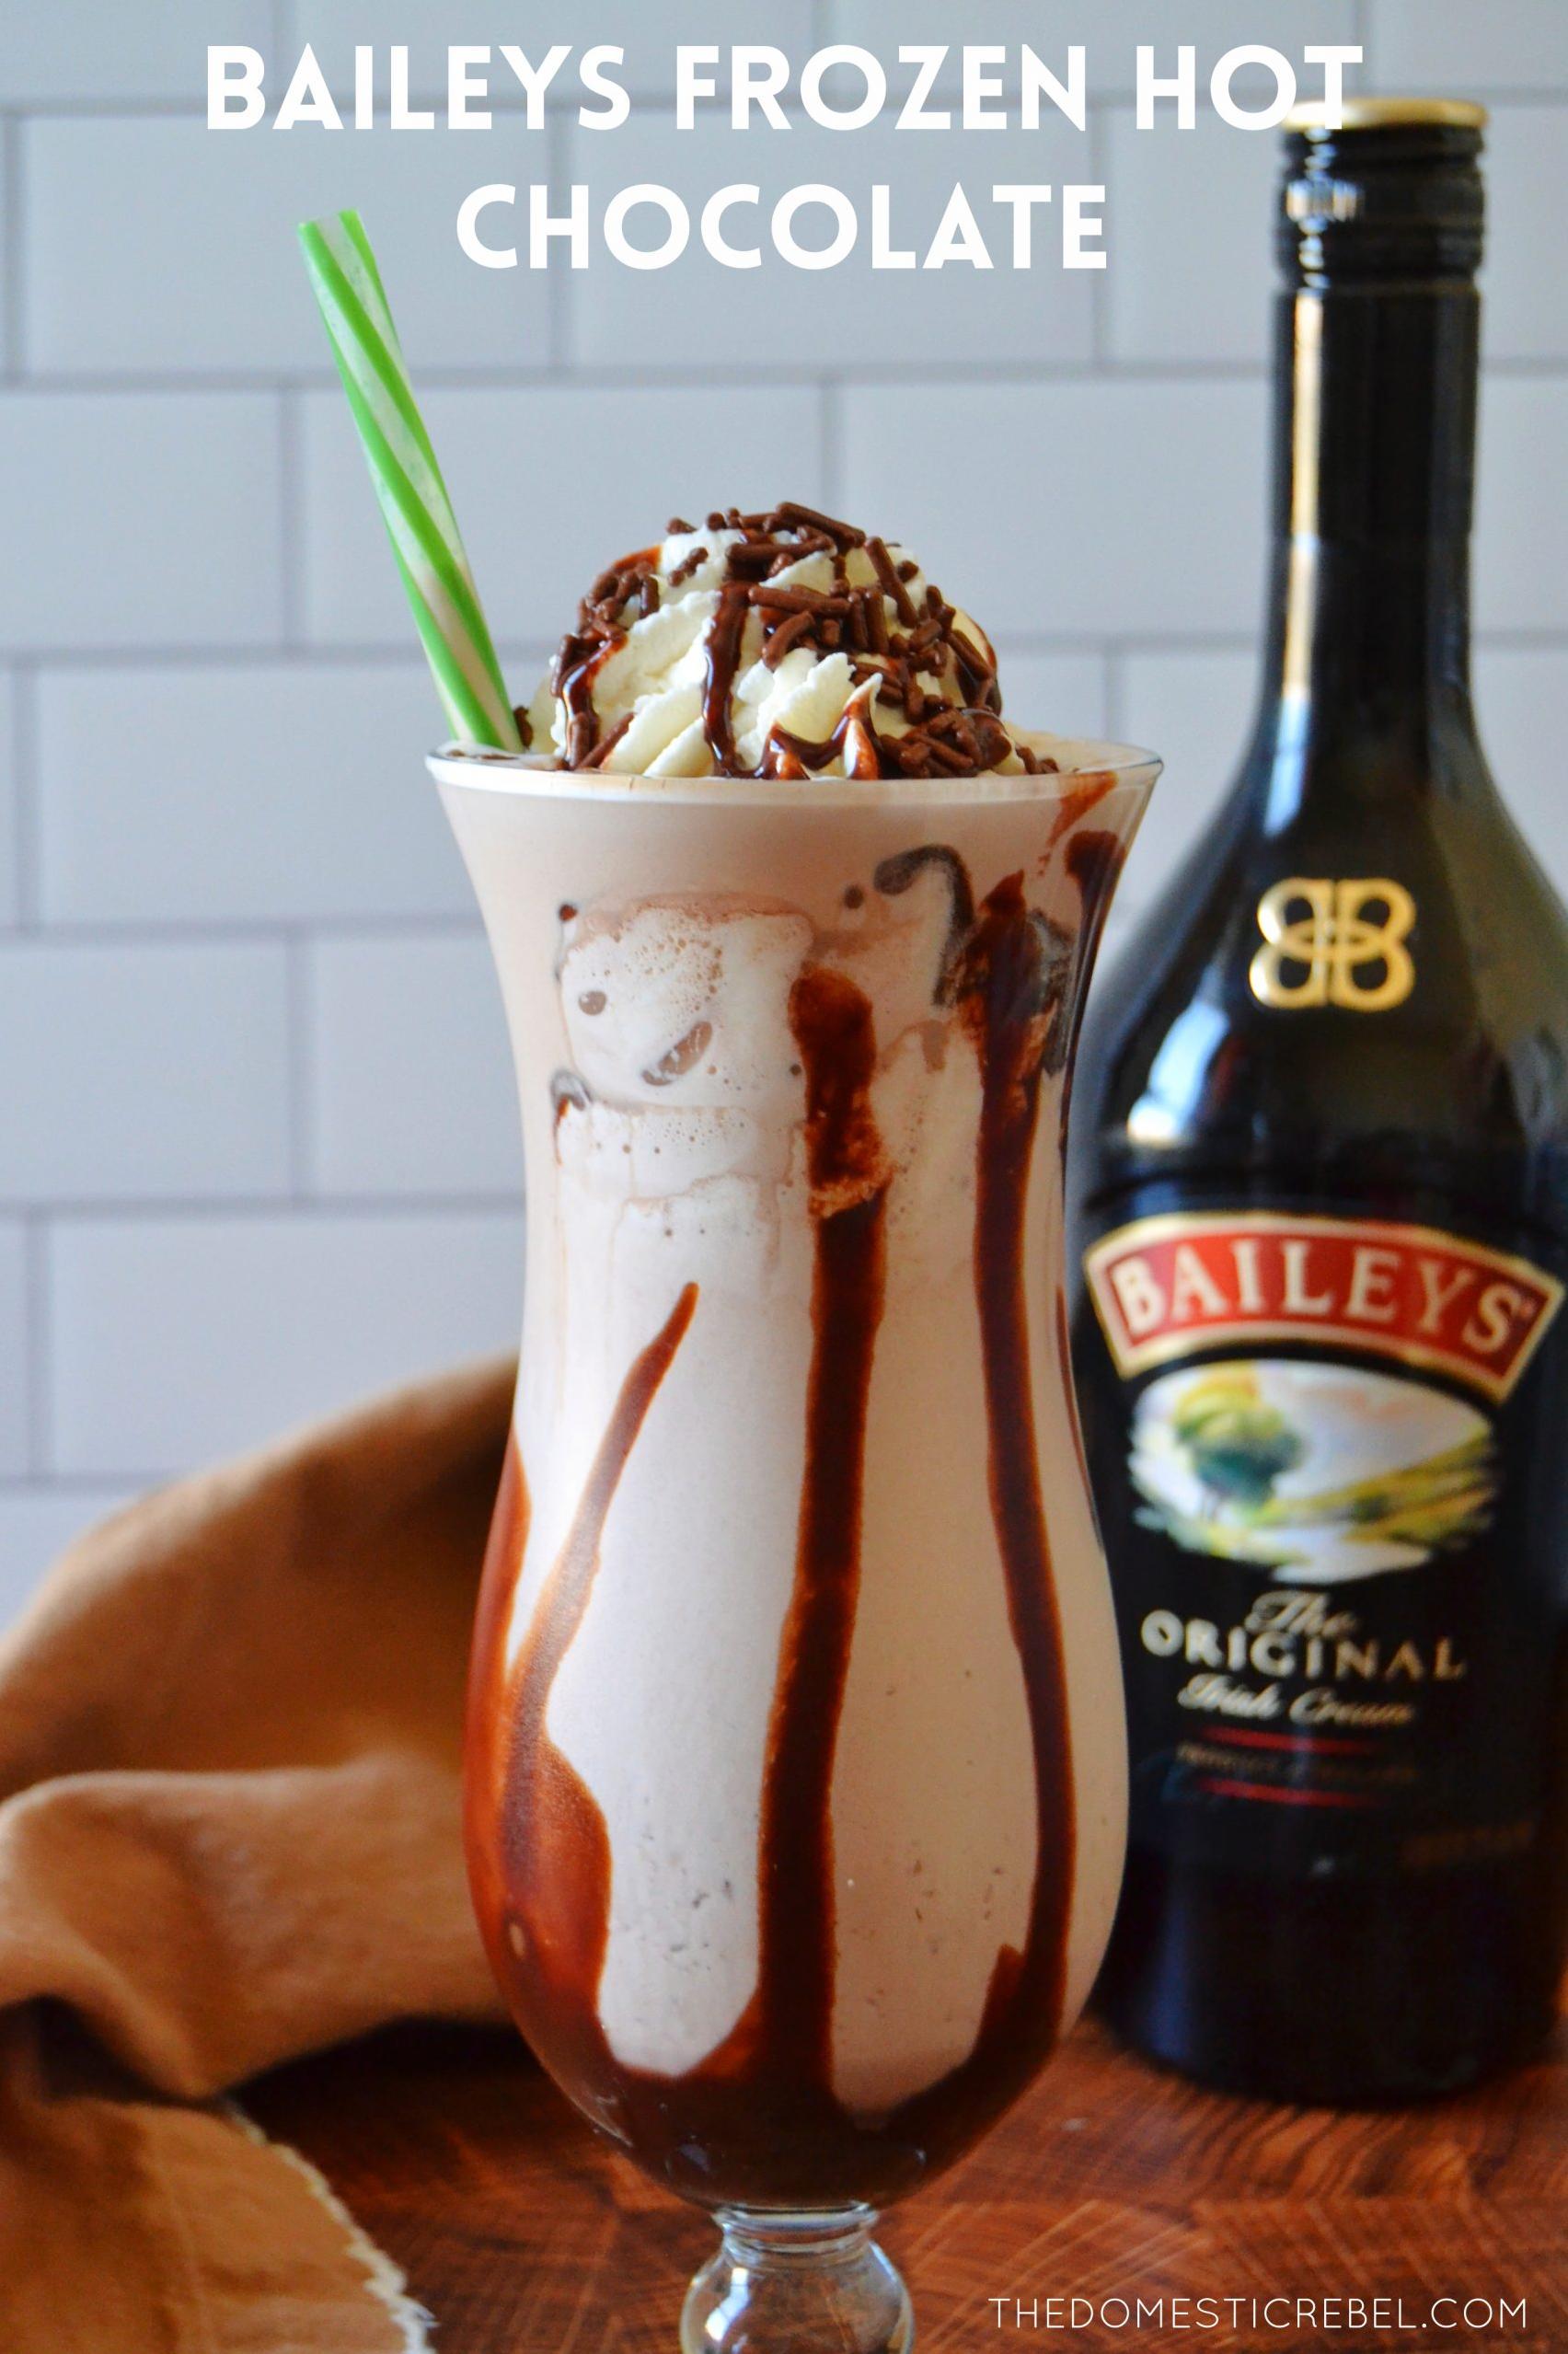  Sip into something cozy with this delicious Irish delight.